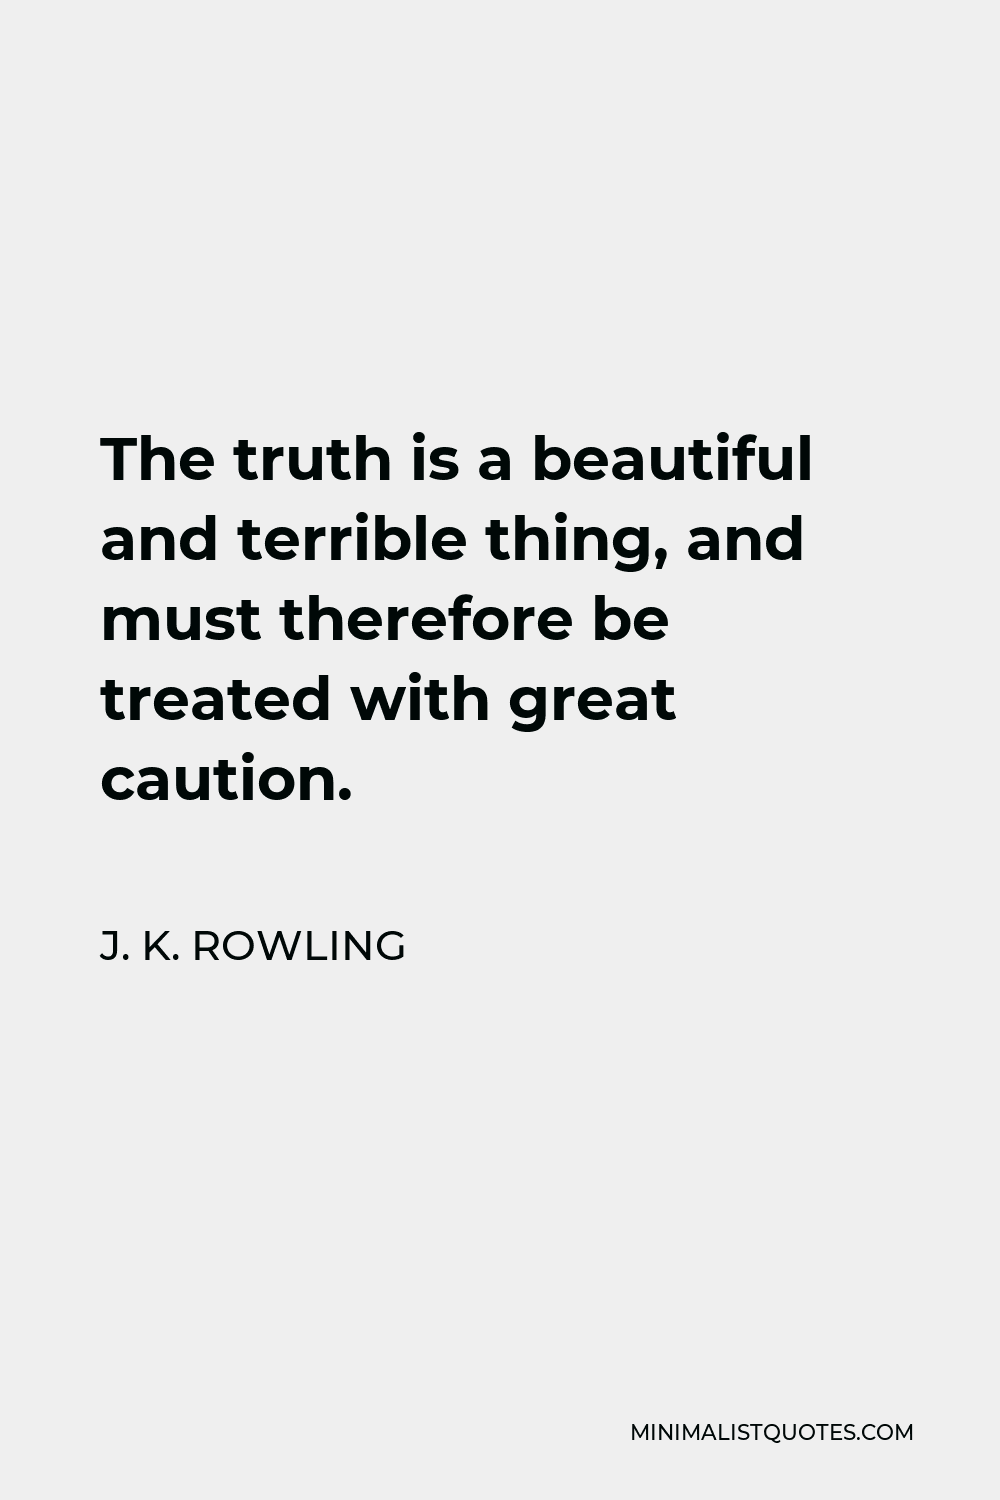 J. K. Rowling Quote - The truth is a beautiful and terrible thing, and must therefore be treated with great caution.